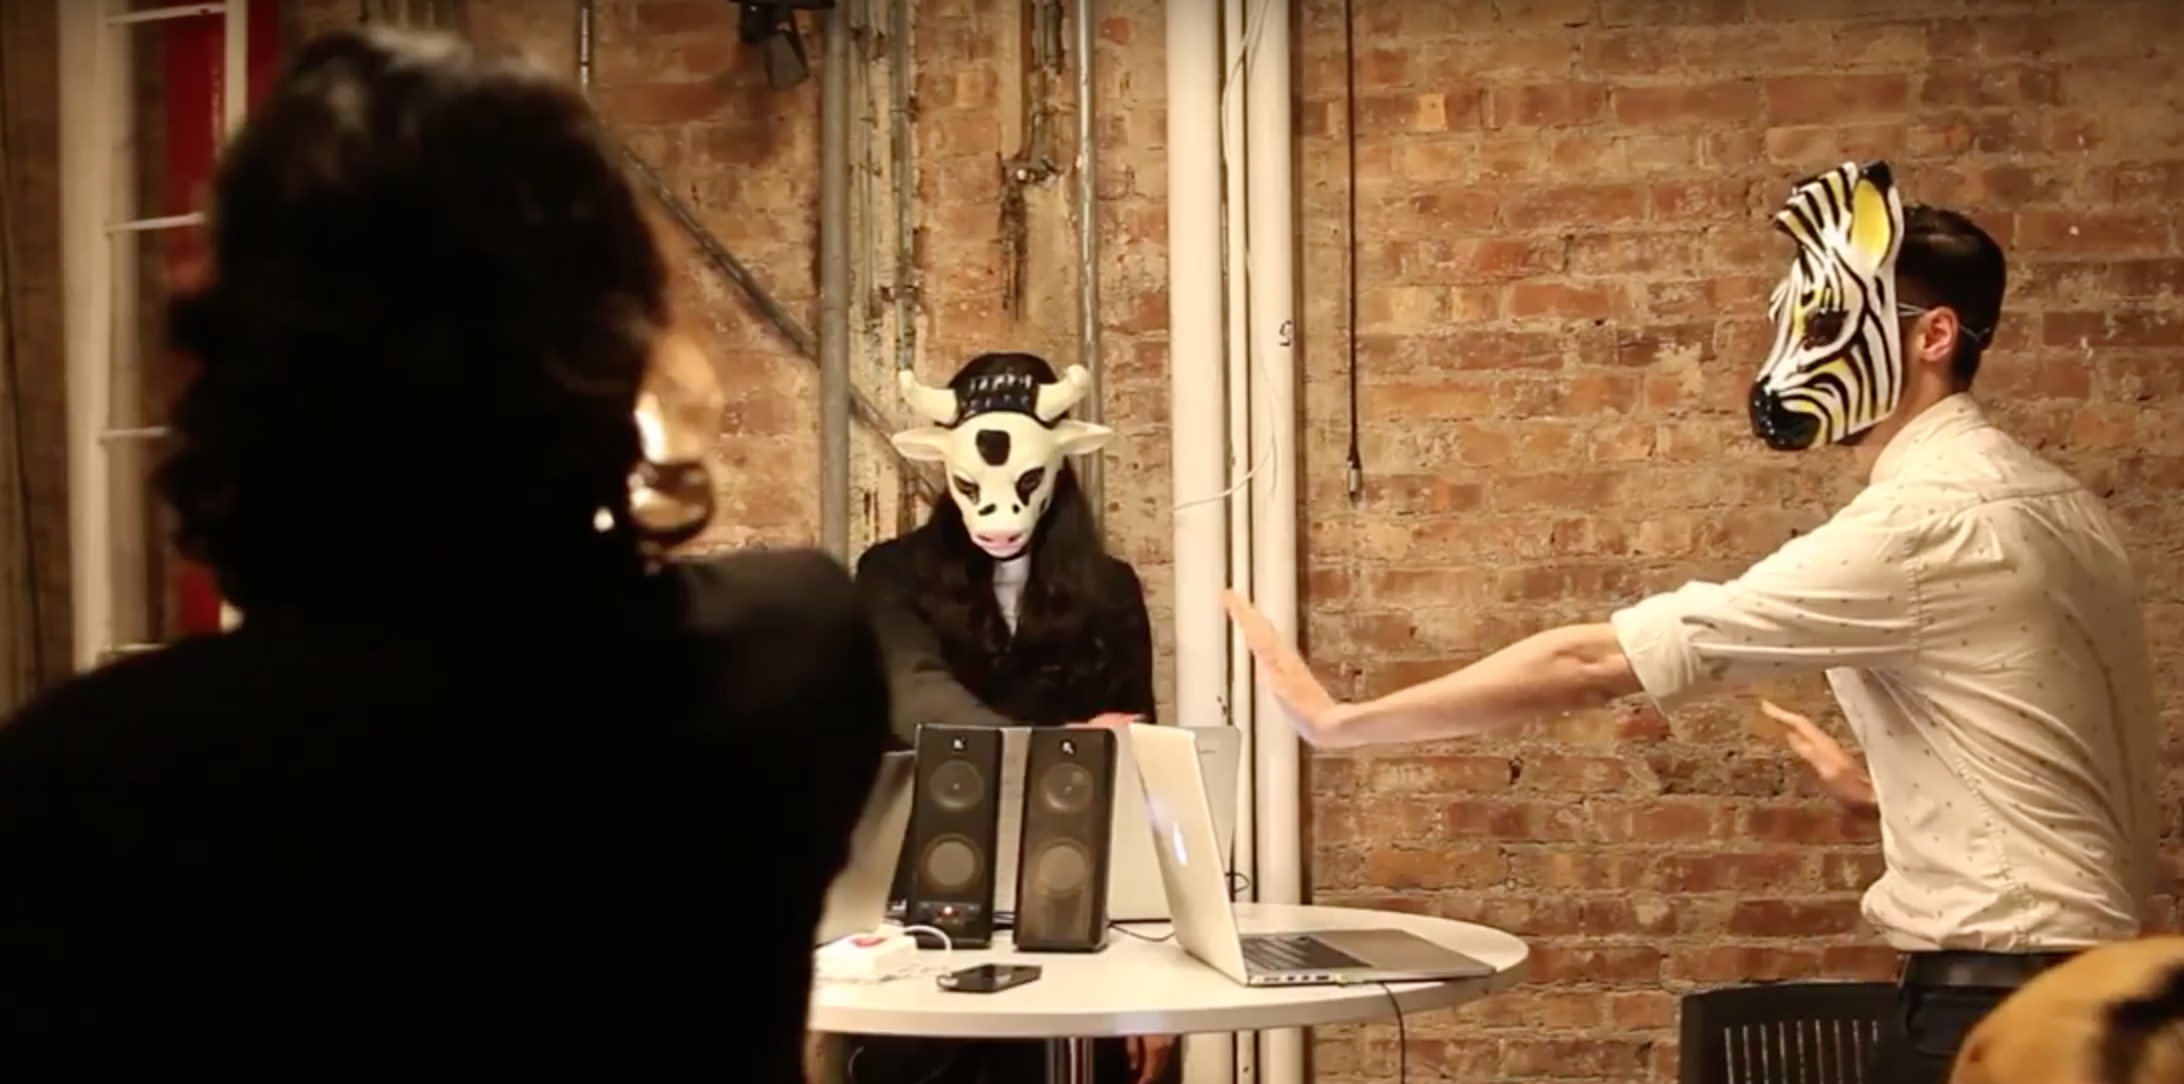 A gesture based performance piece by humans wearing animal masks generating music with computers.